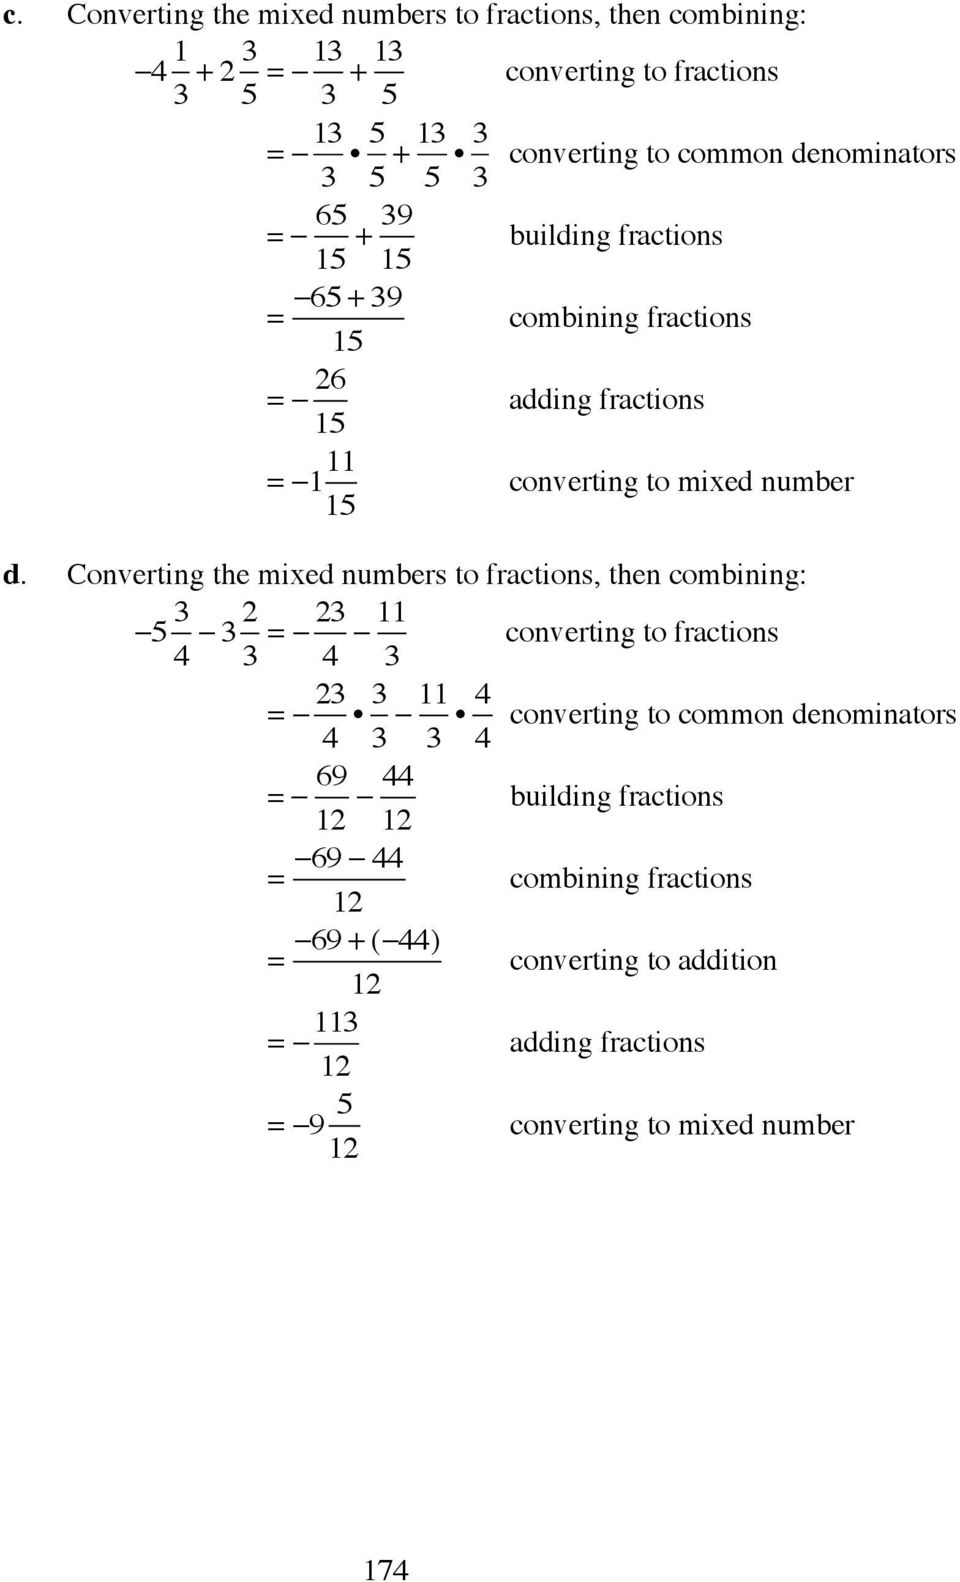 Converting the mixed numbers to fractions, then combining:! 3 4! 3 2 3! 23 4! 11 converting to fractions 3!